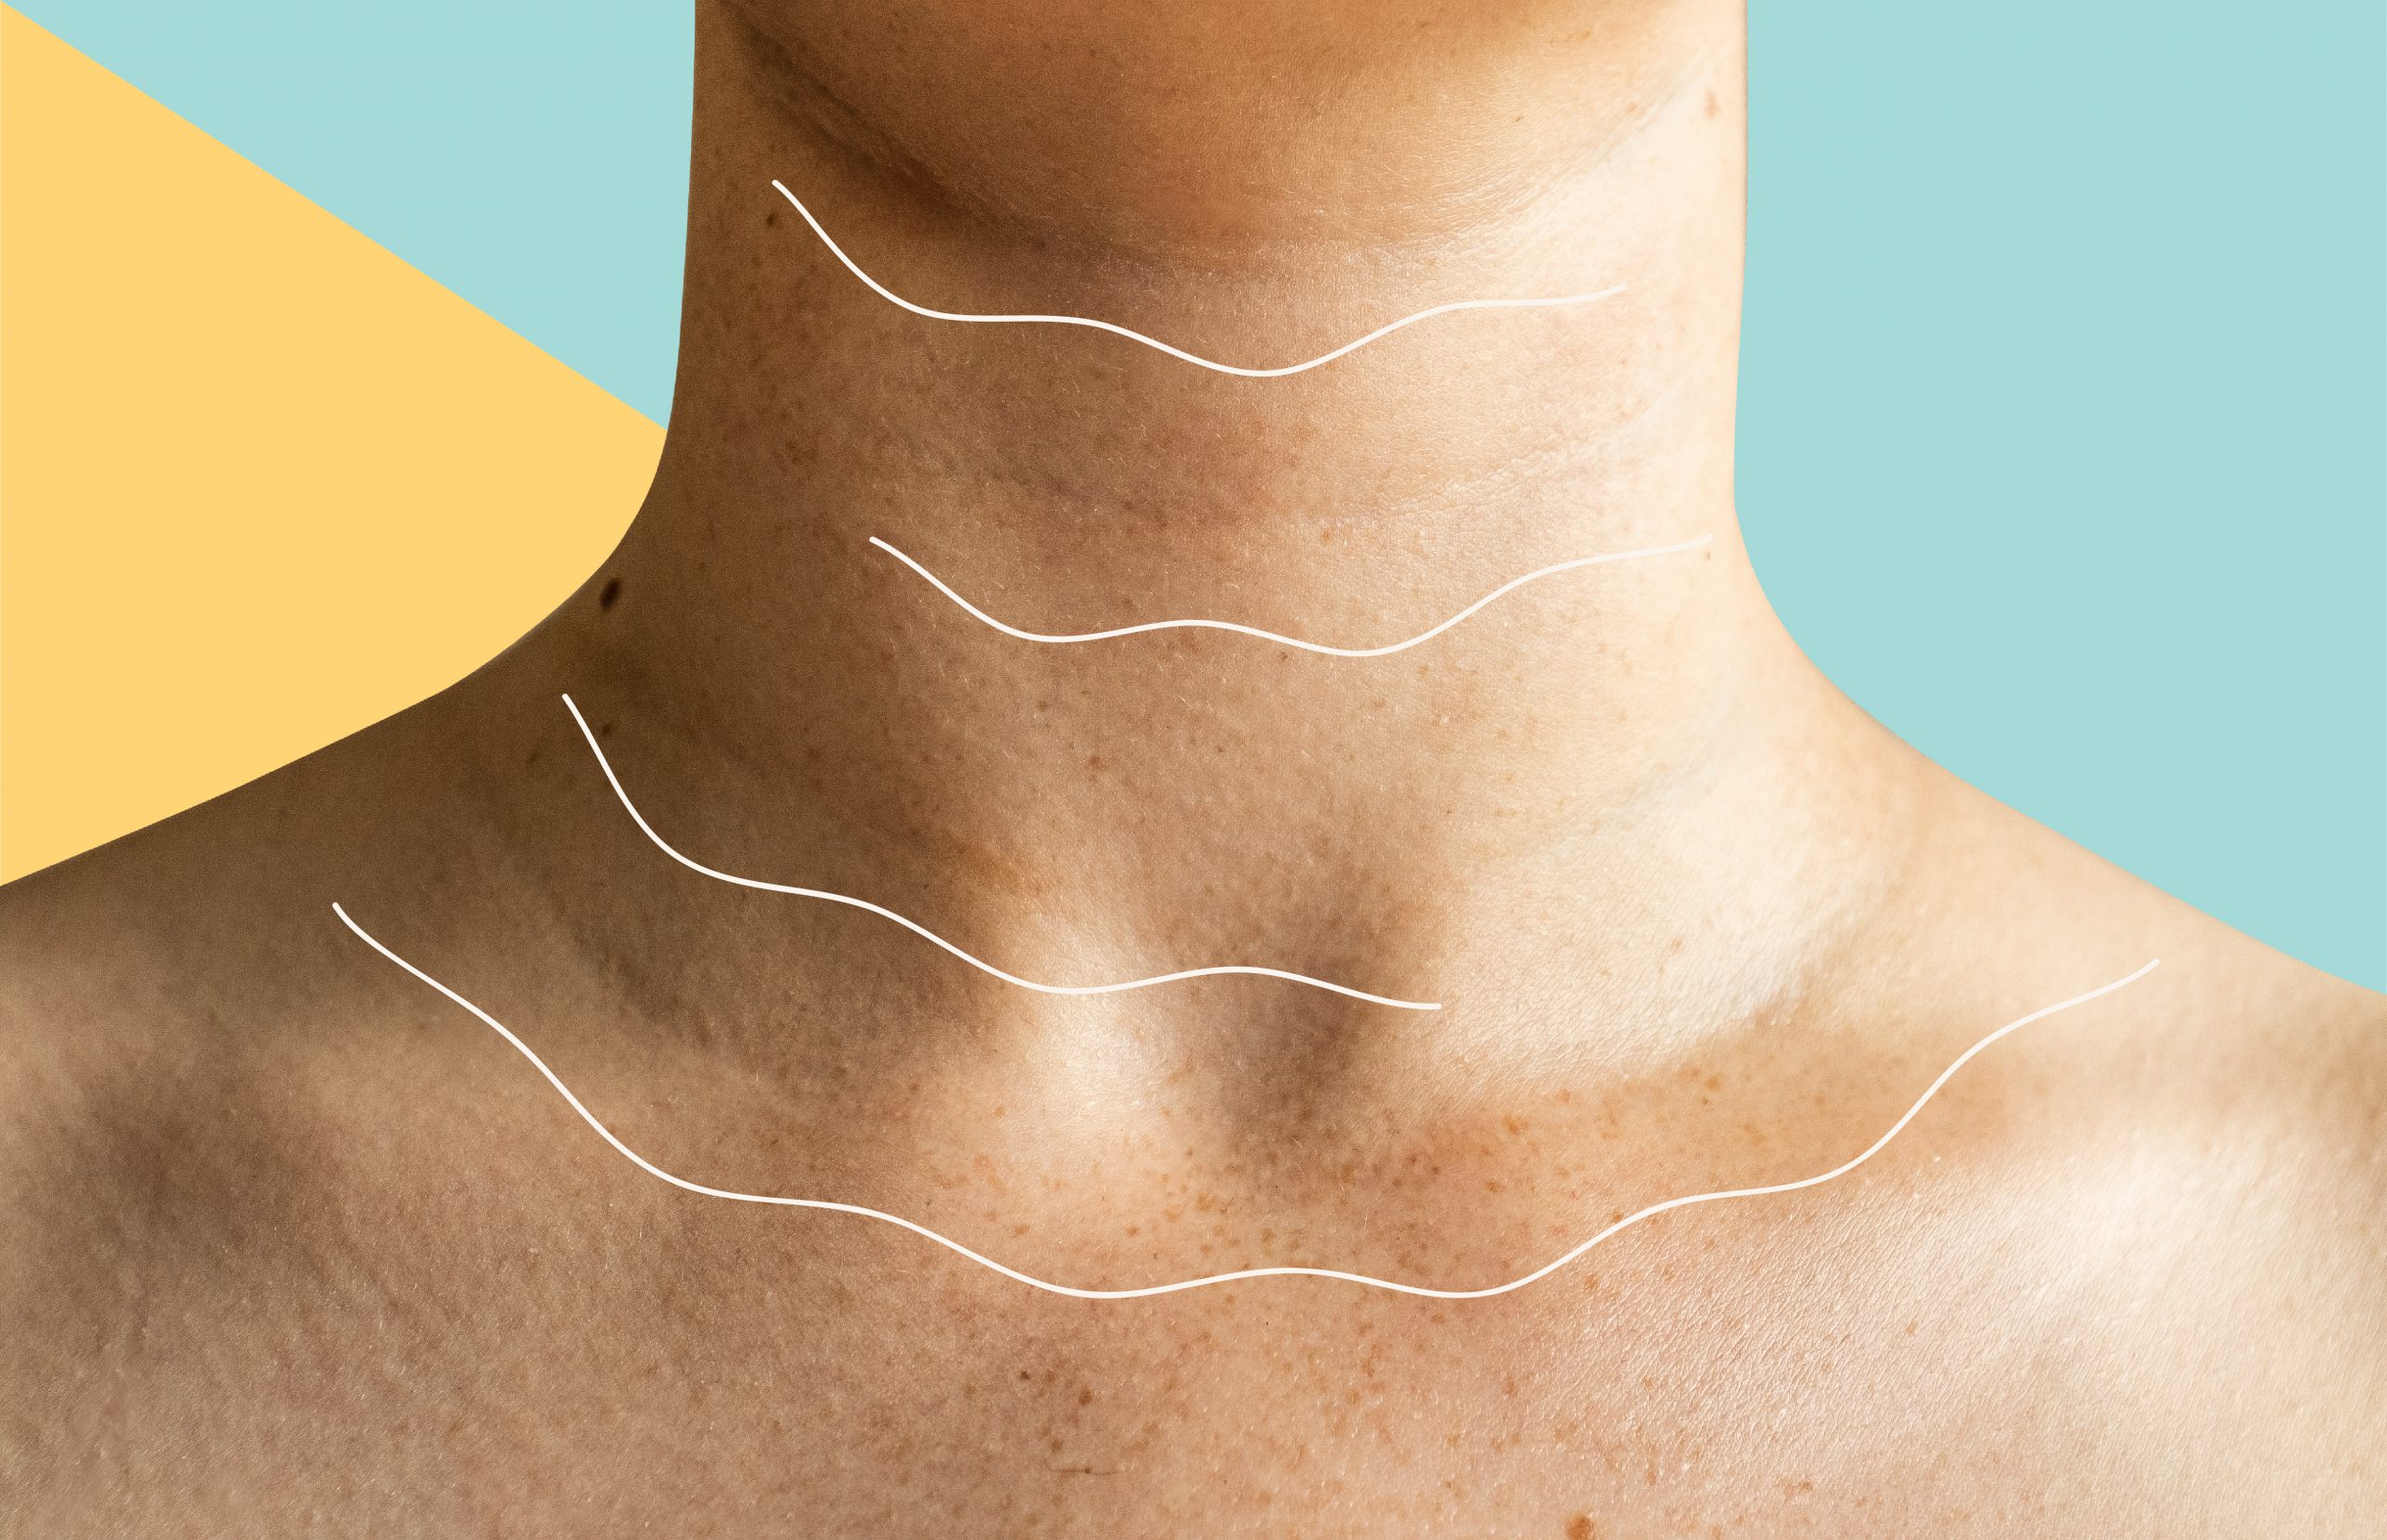 Tips on how to Forestall and Get Rid of “Tech Neck,” Based on Skincare Consultants